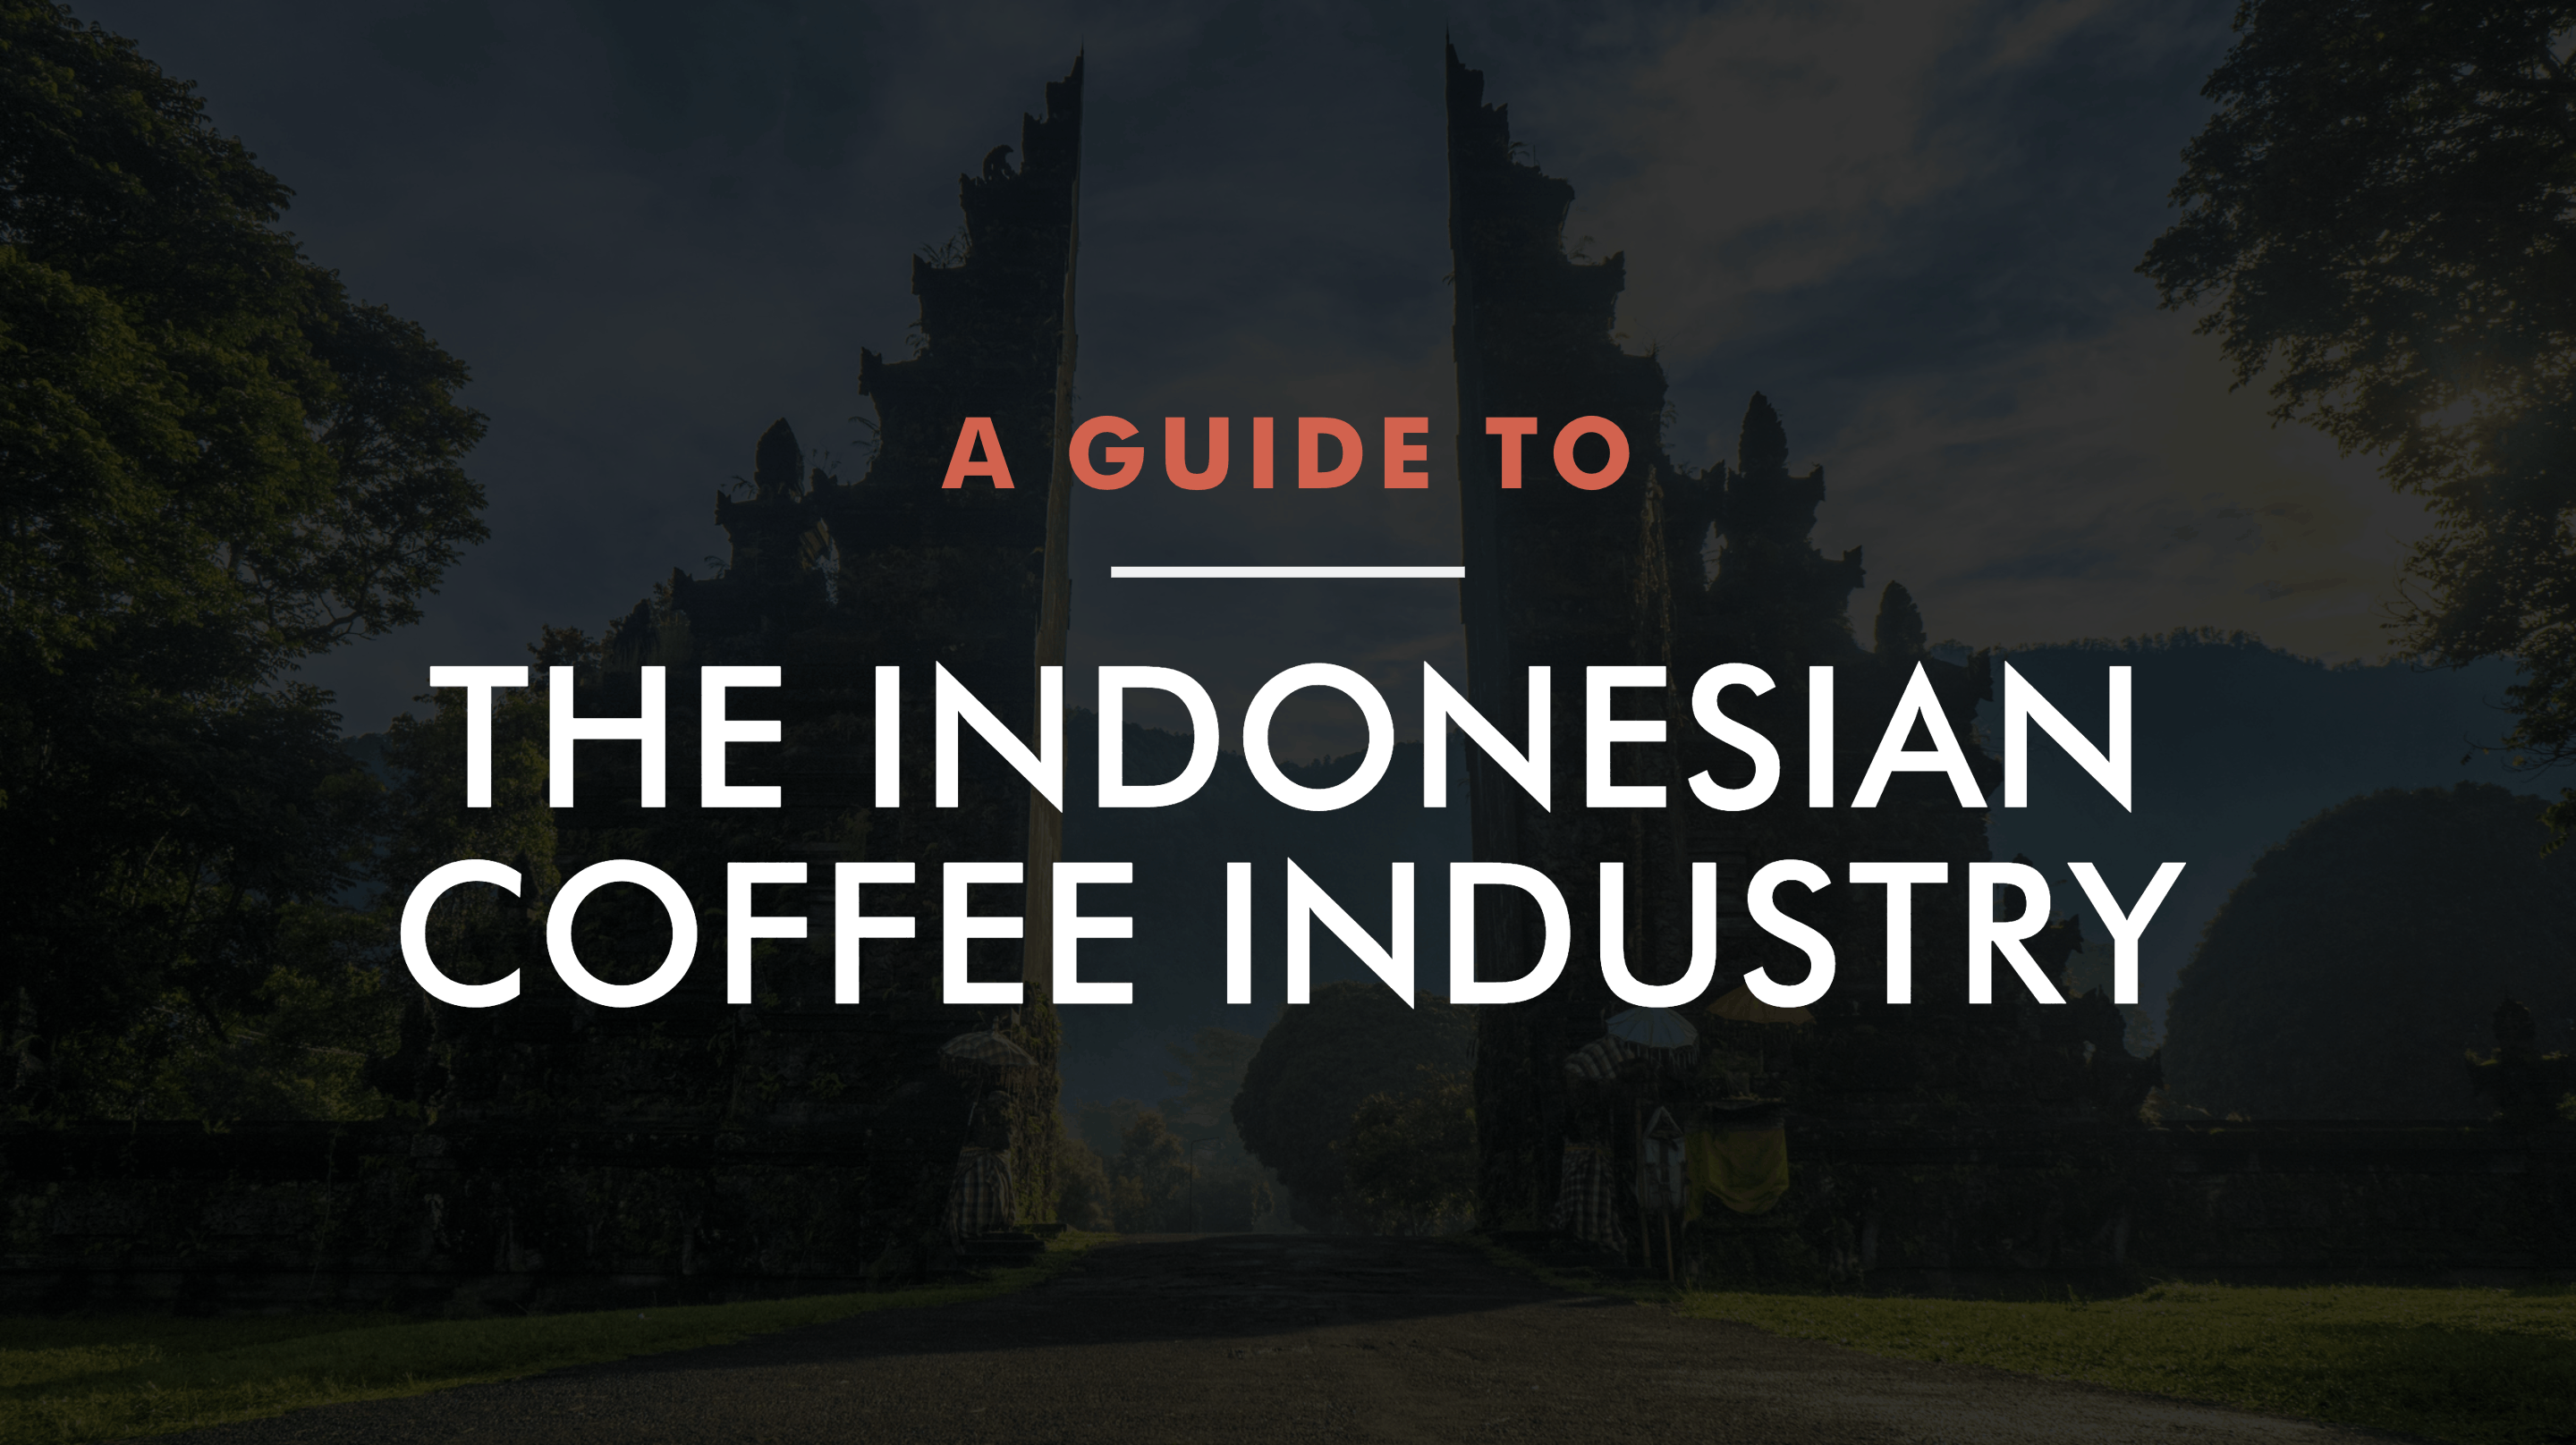 The Indonesian Coffee Industry